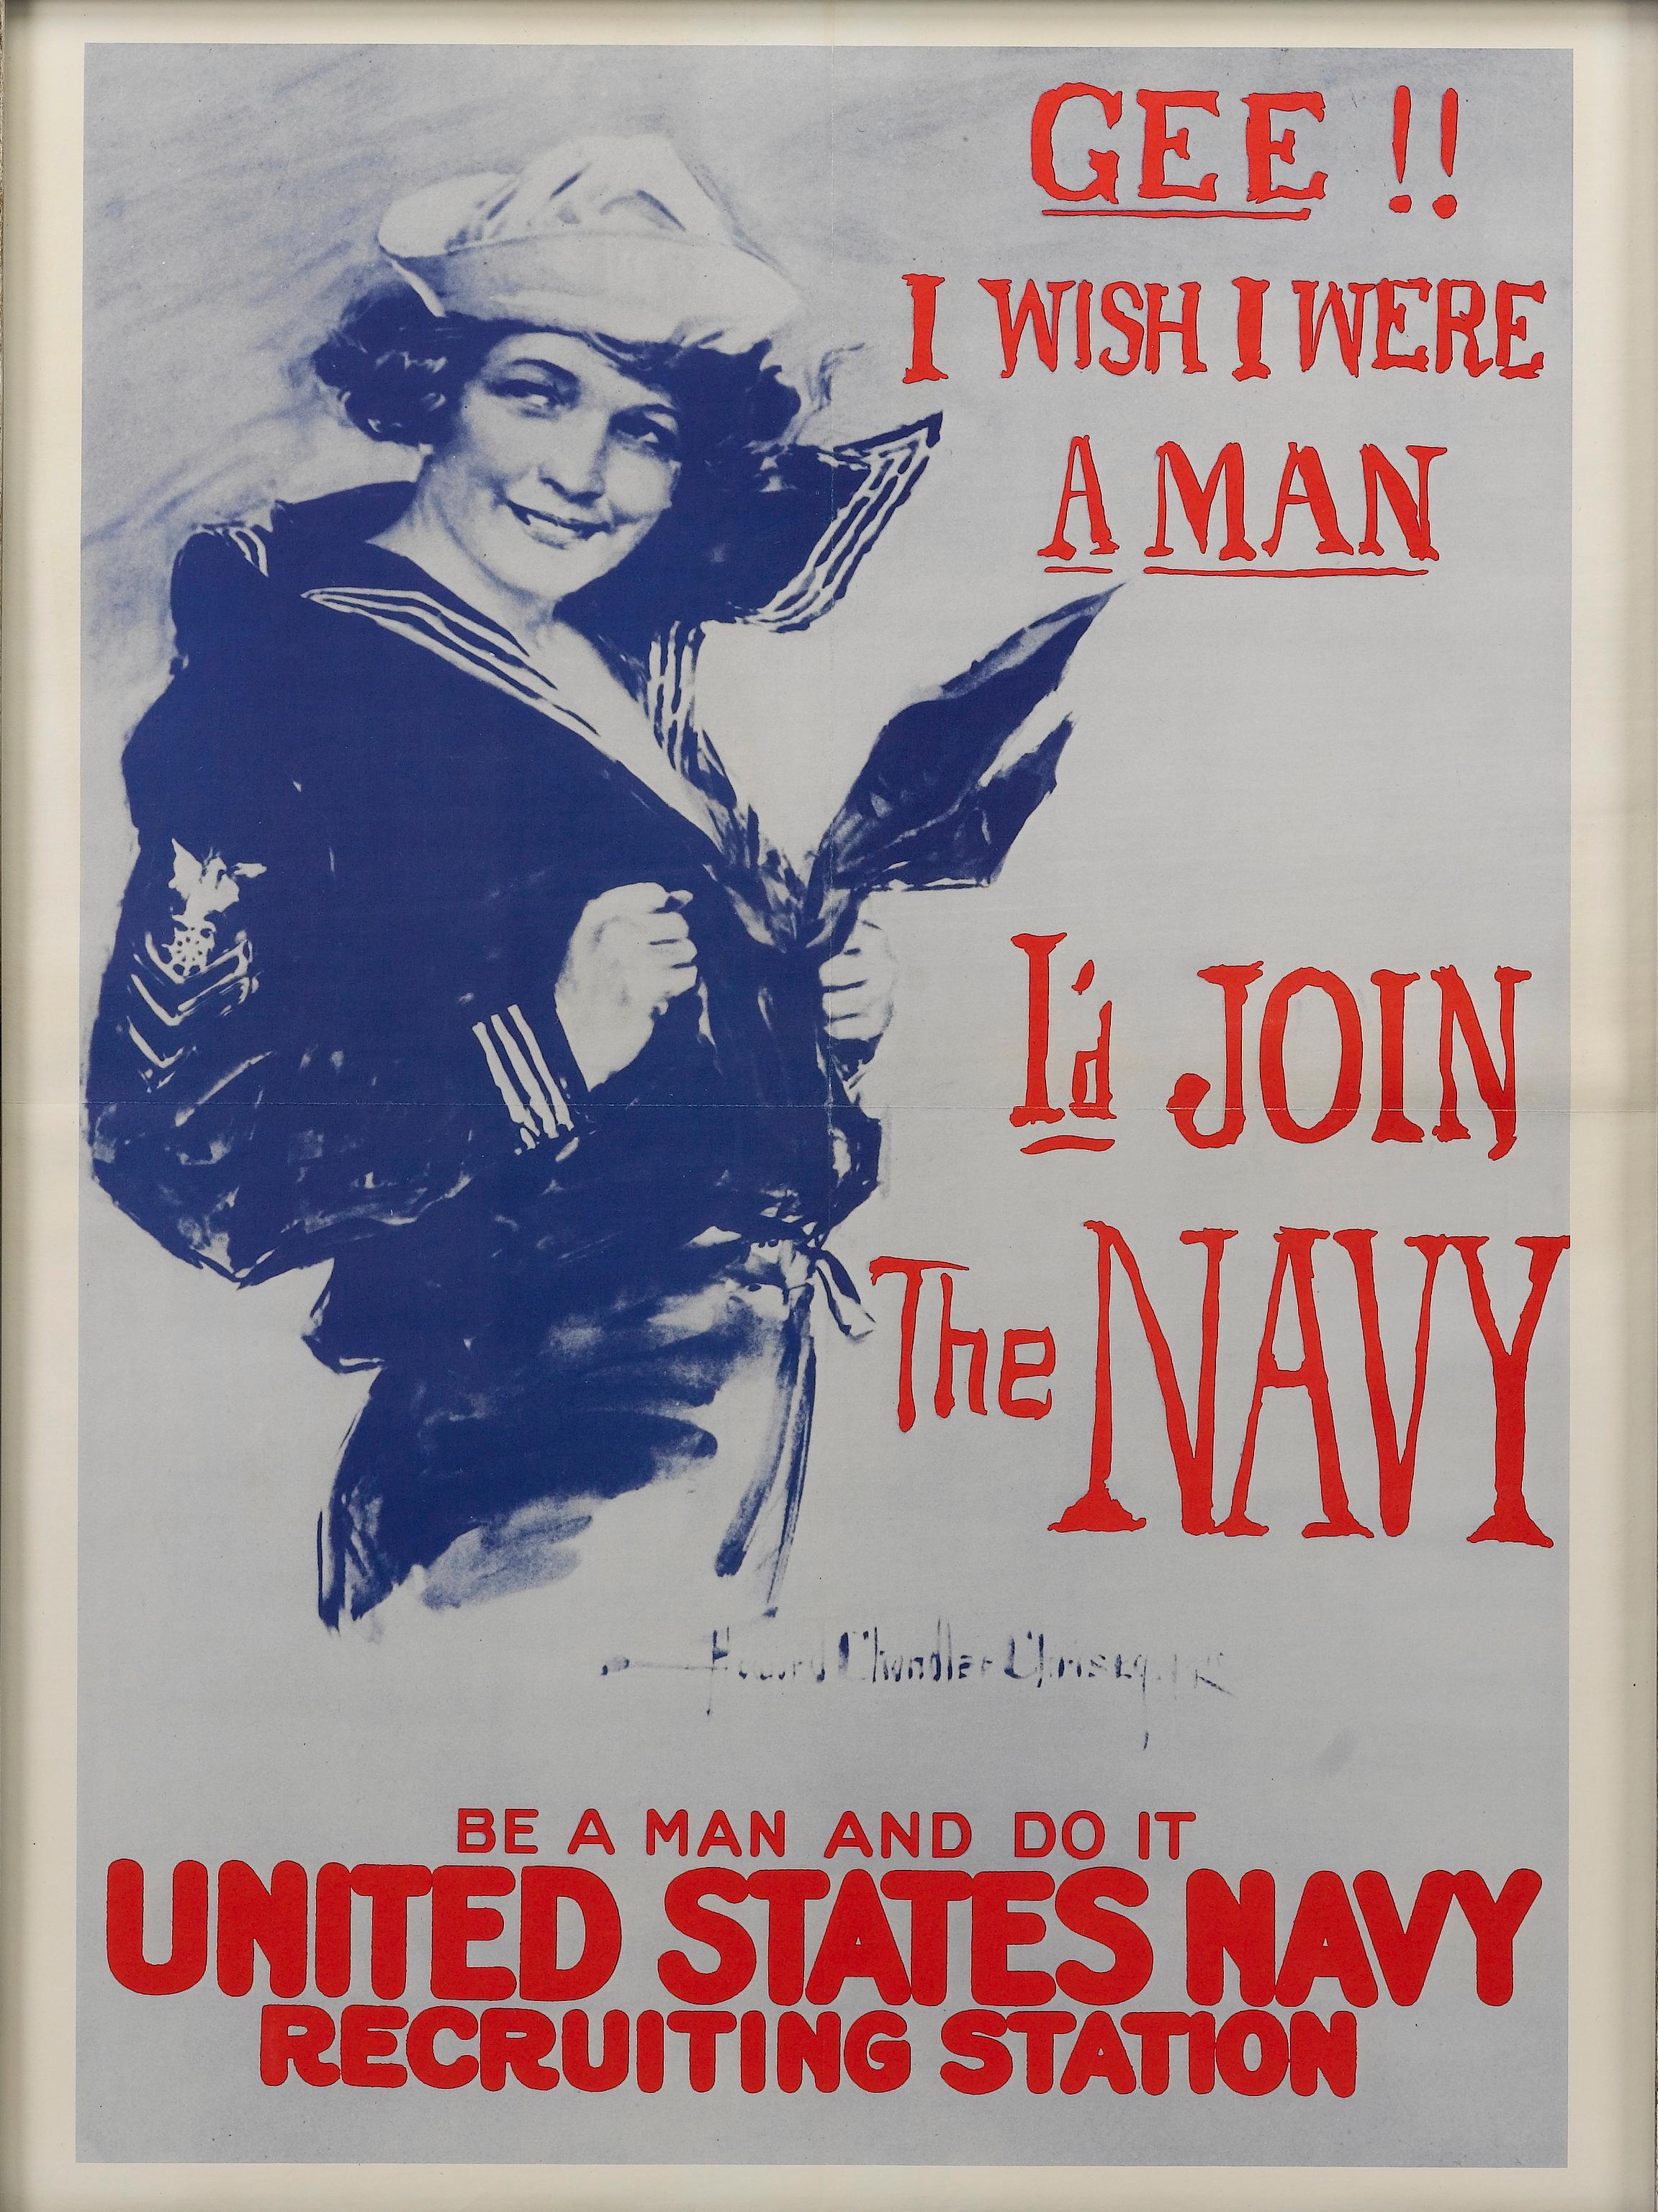 This poster was originally published in 1917 to support Navy recruitment and was subsequently reprinted for the second world war, which is the case with this example. 

In World War I, the frontline was not viewed as a place fit for a woman. While